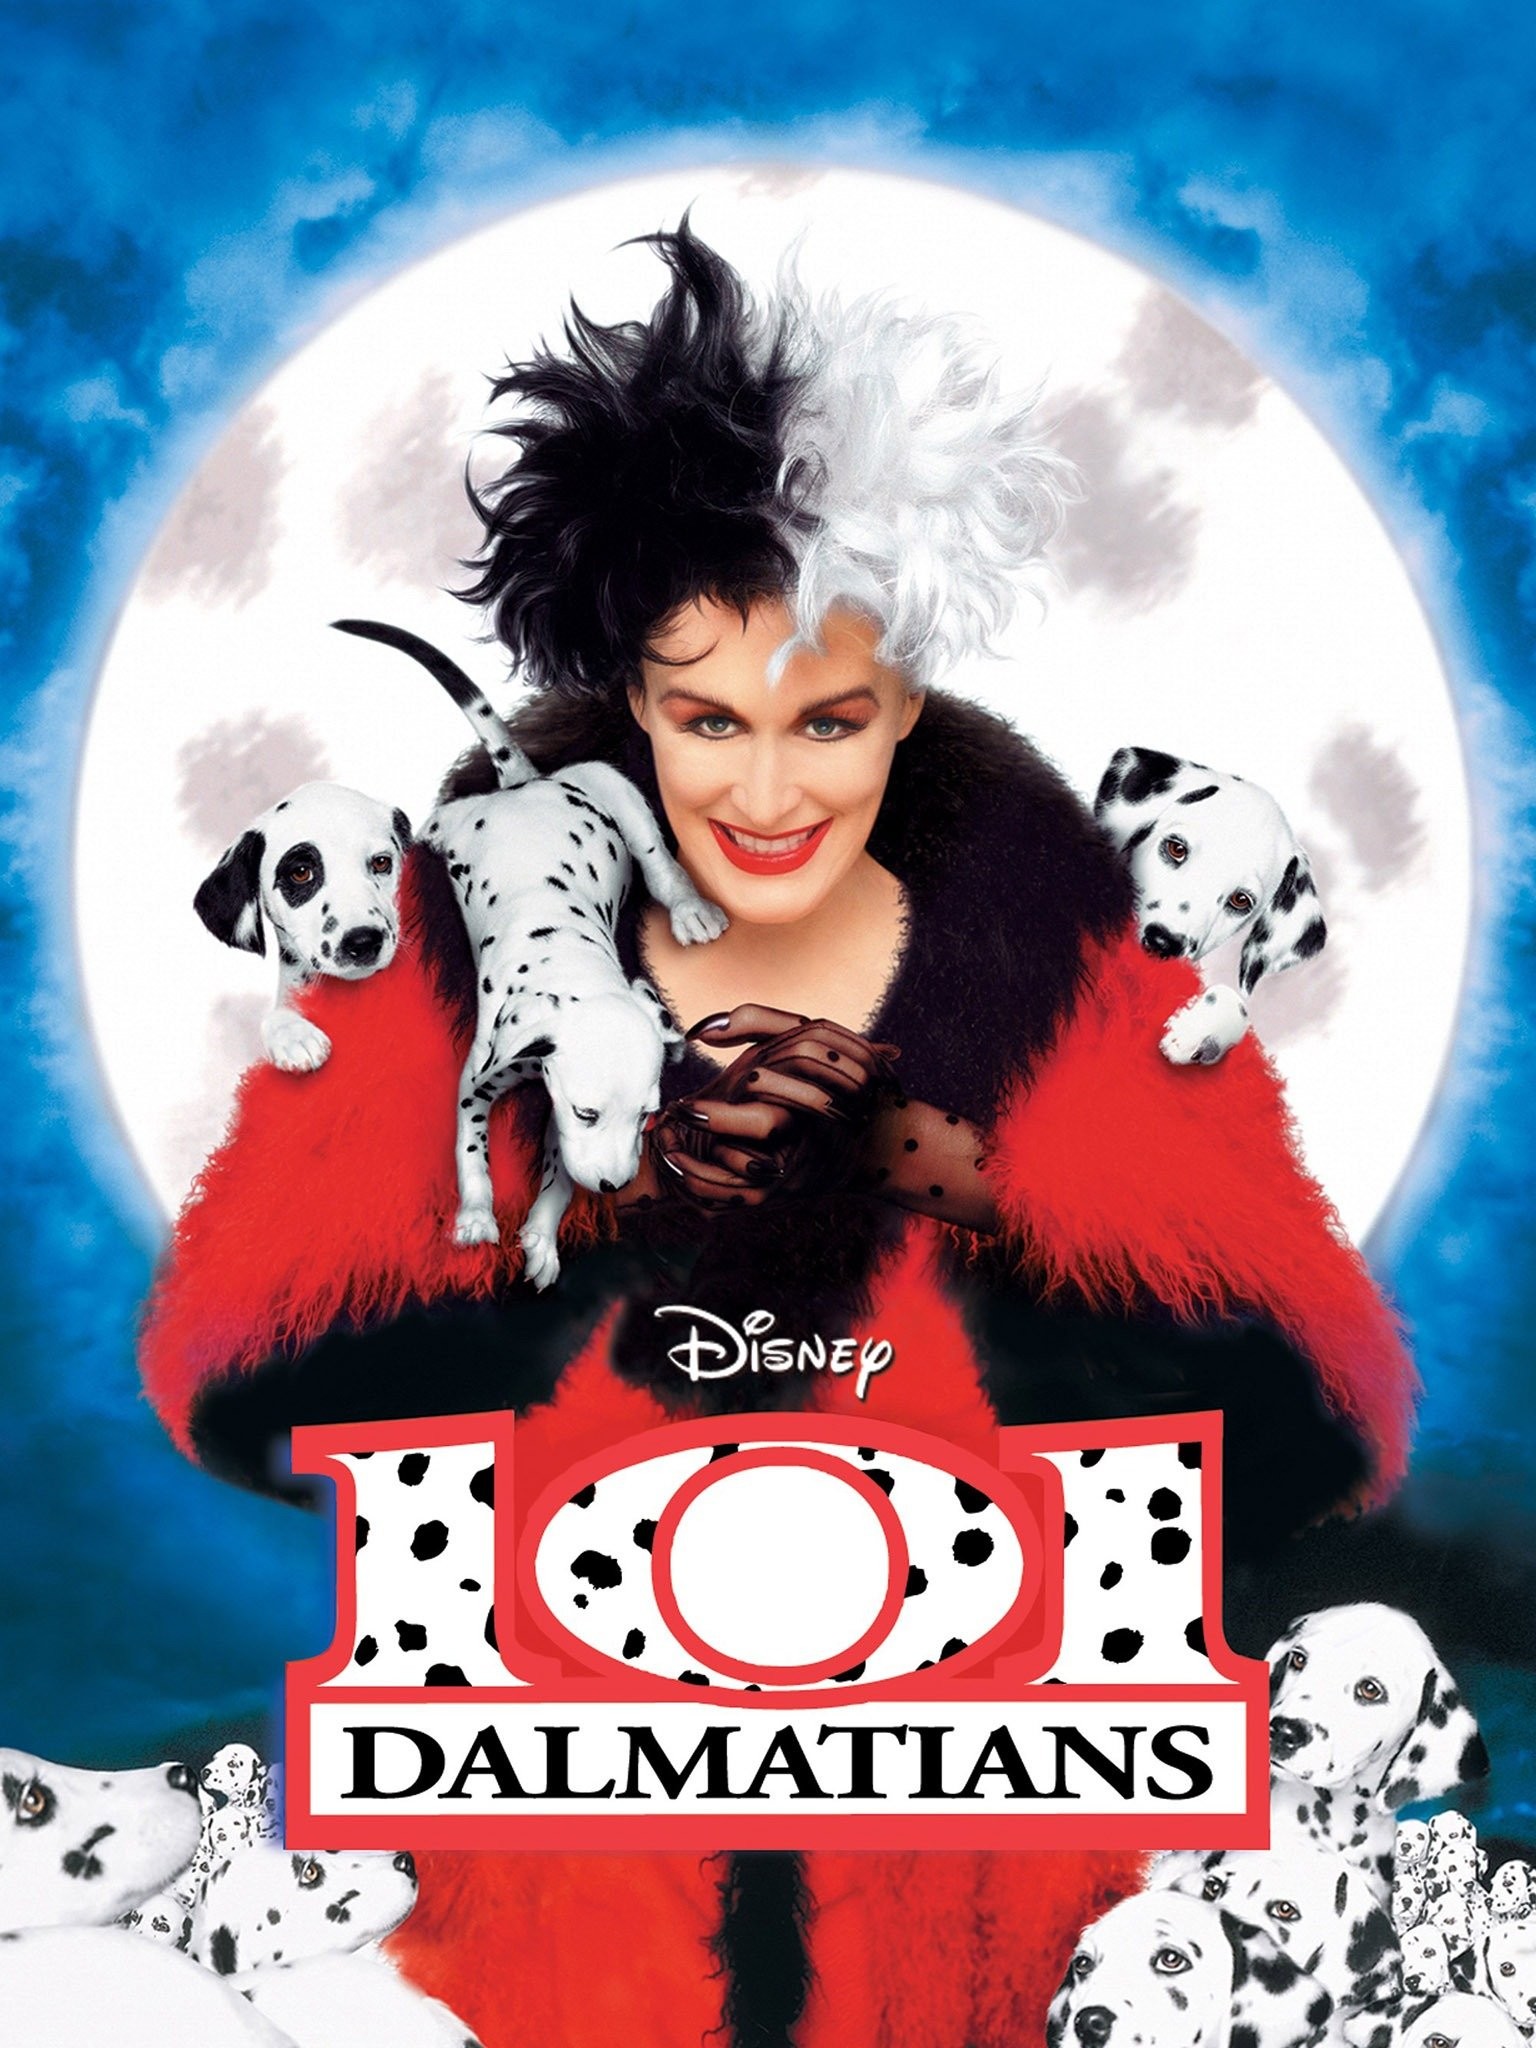 Watch 101 Dalmatians Take the Stage in Official Trailer for New